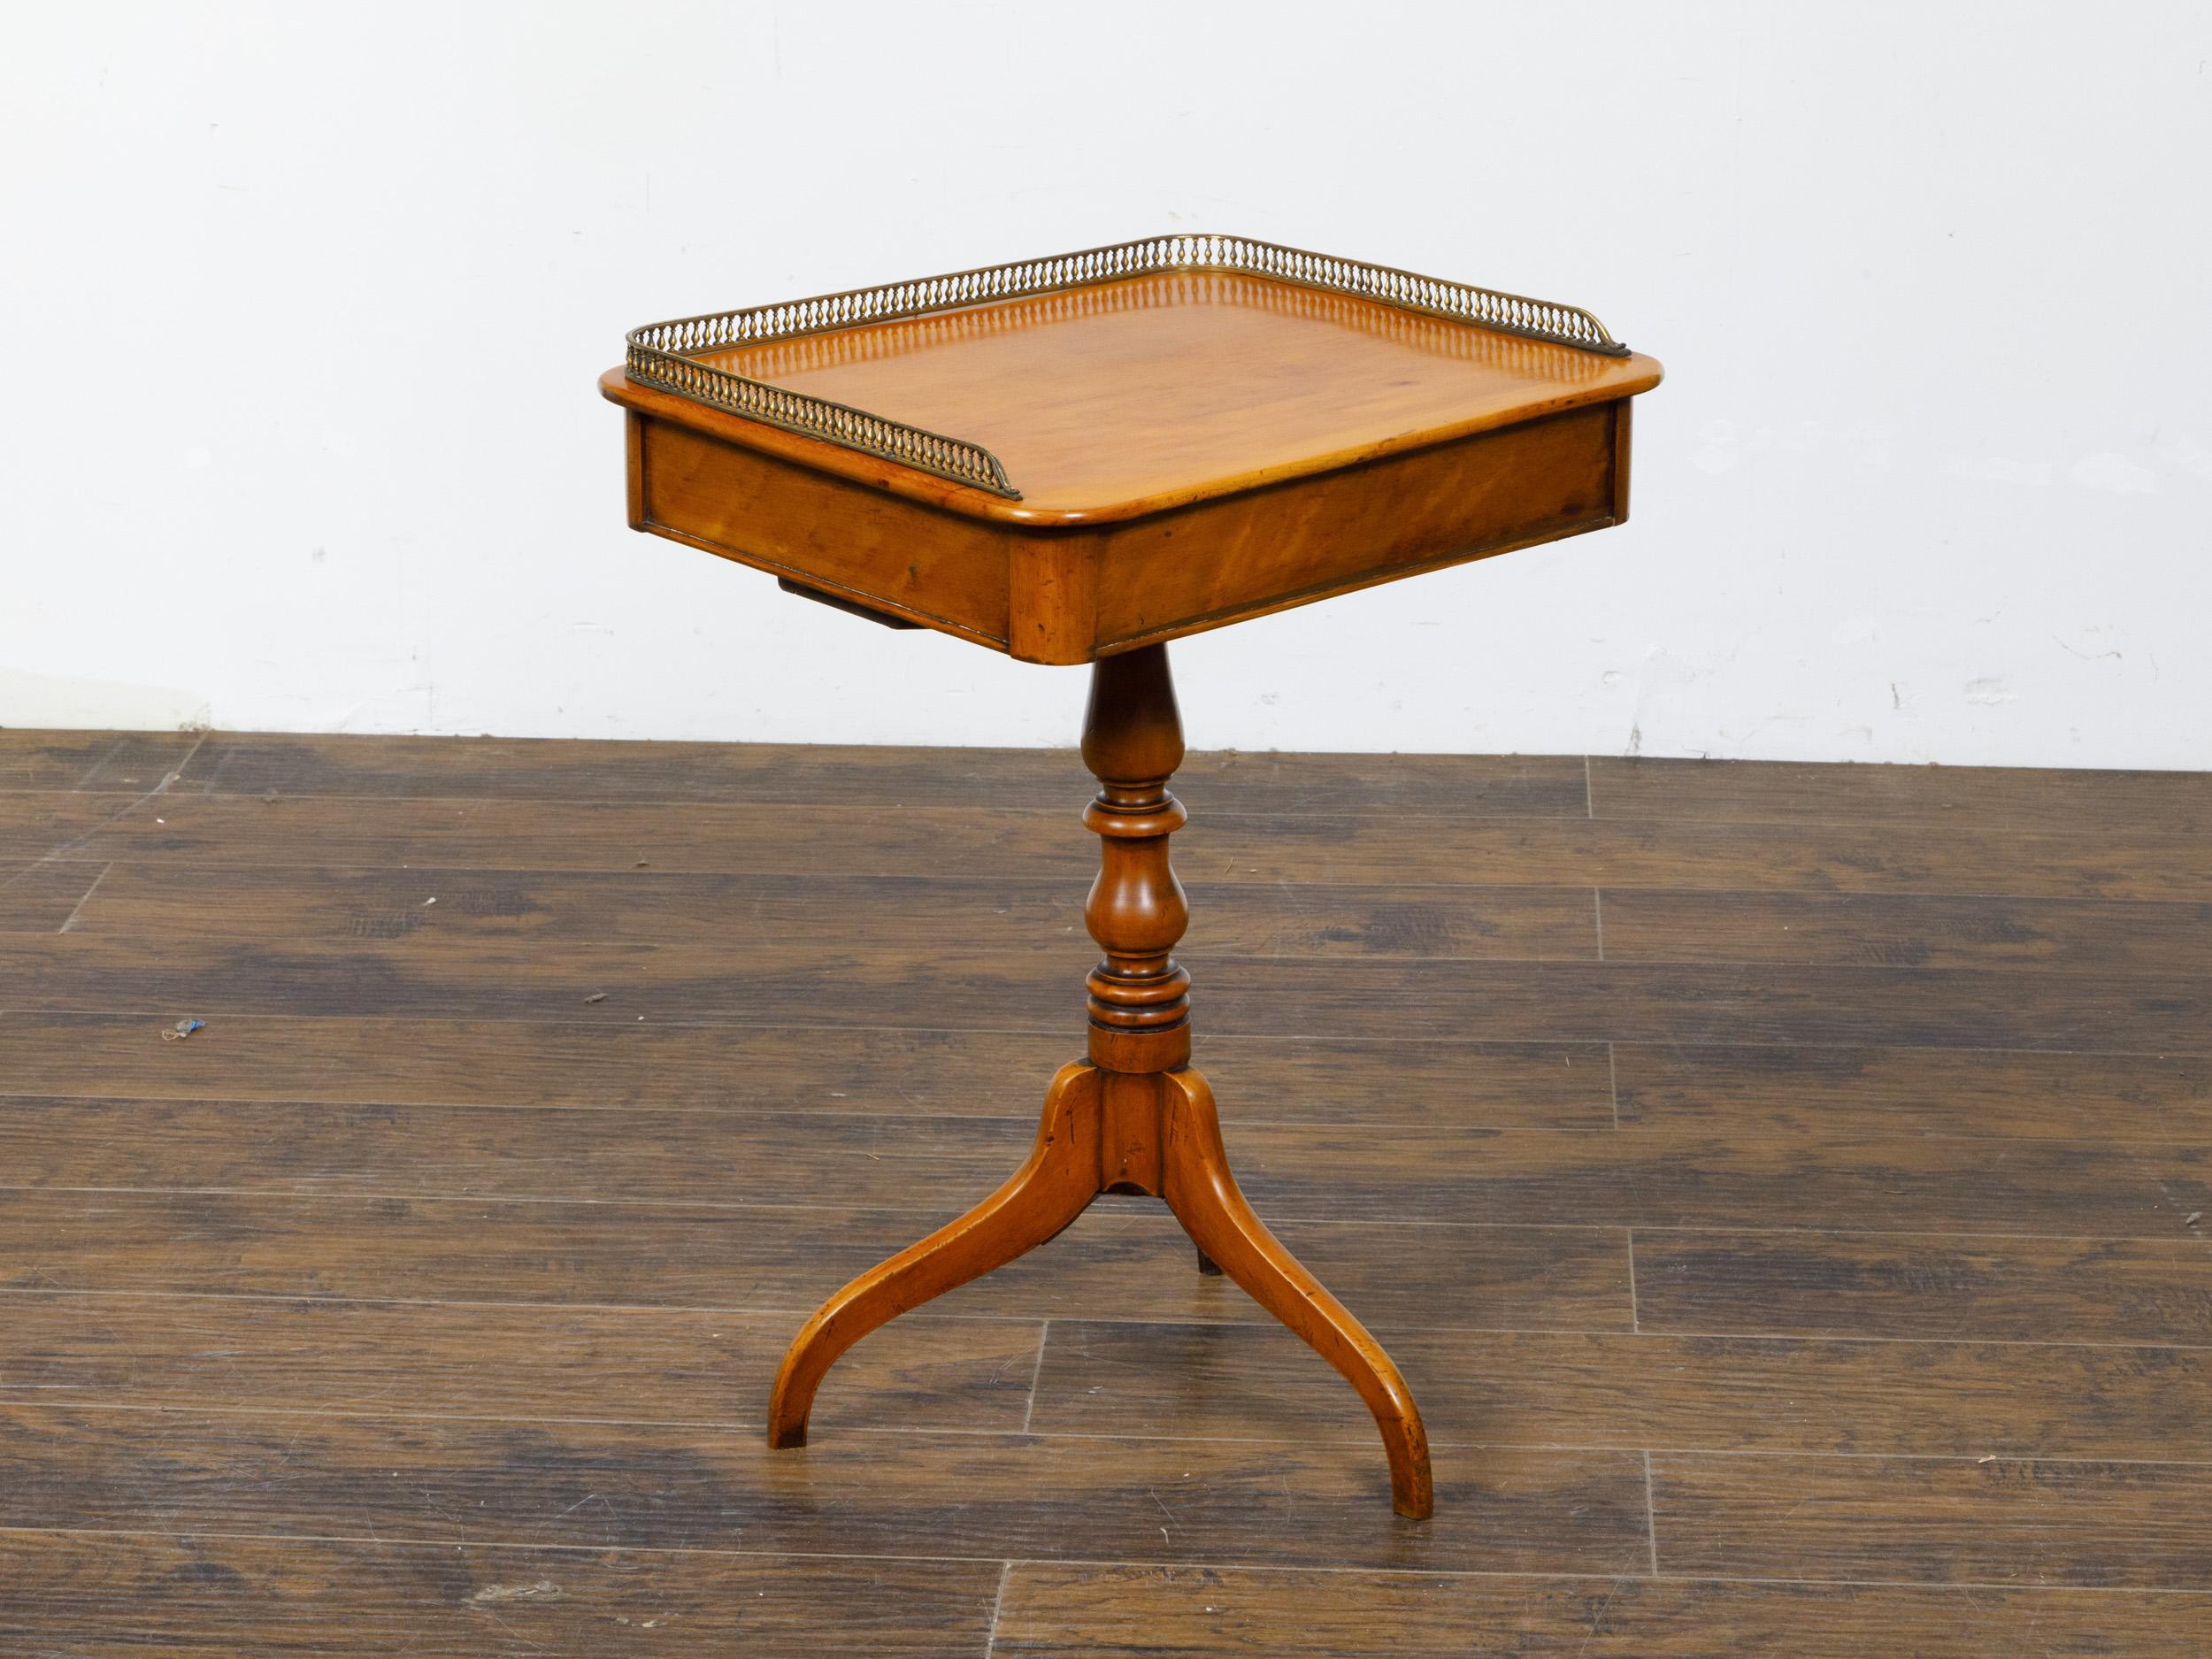 Turned English Regency Period Fruitwood Guéridon Side Table with Pierced Brass Gallery For Sale